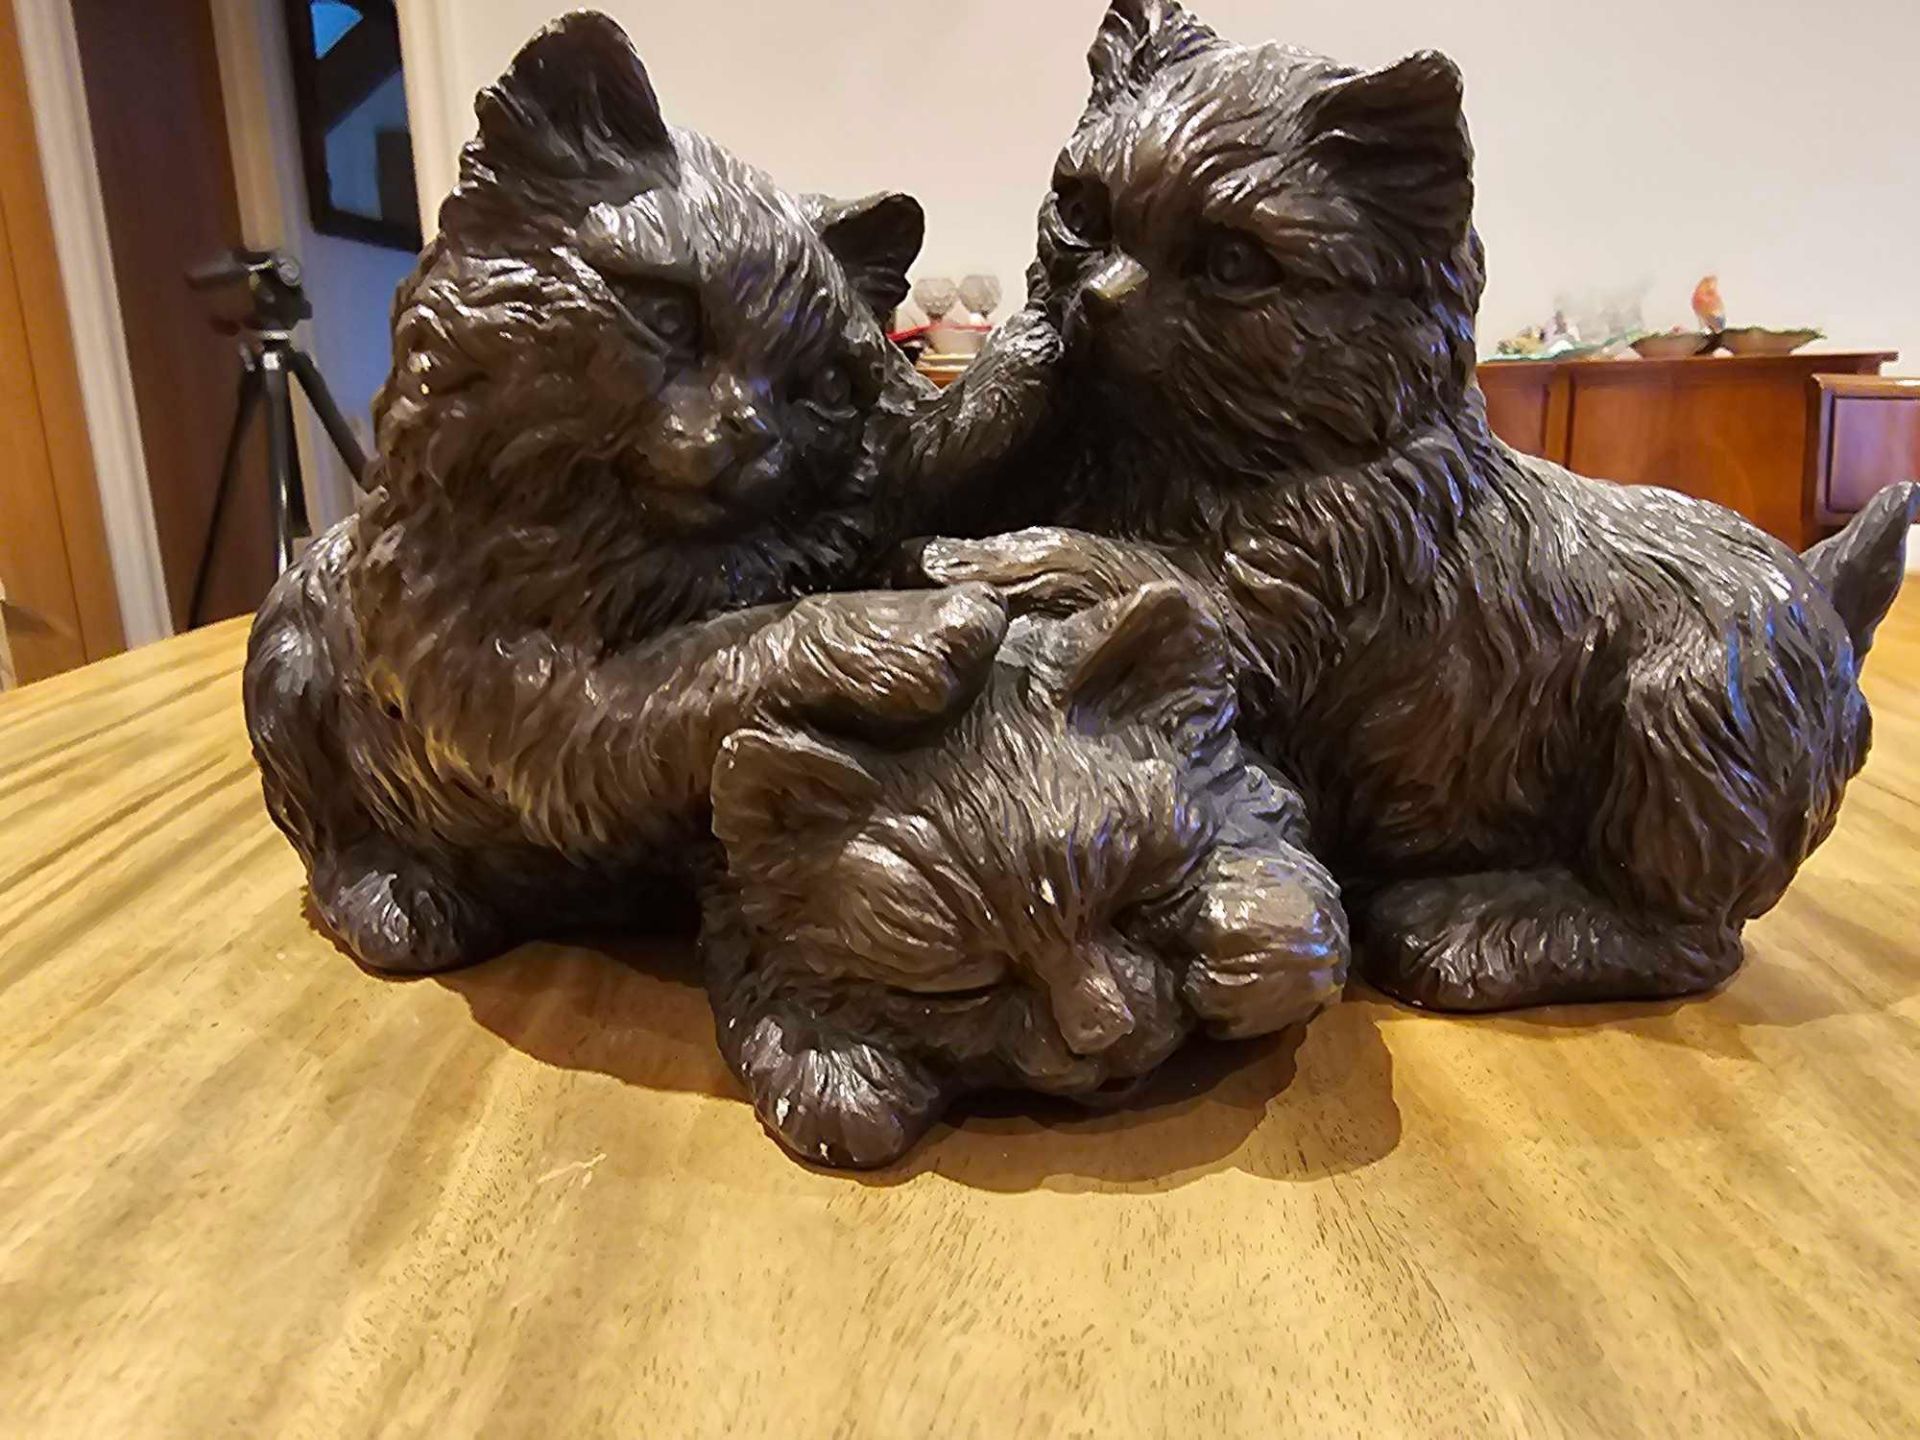 A Resin Figurine Of A Trio Of Kittens - Image 3 of 3